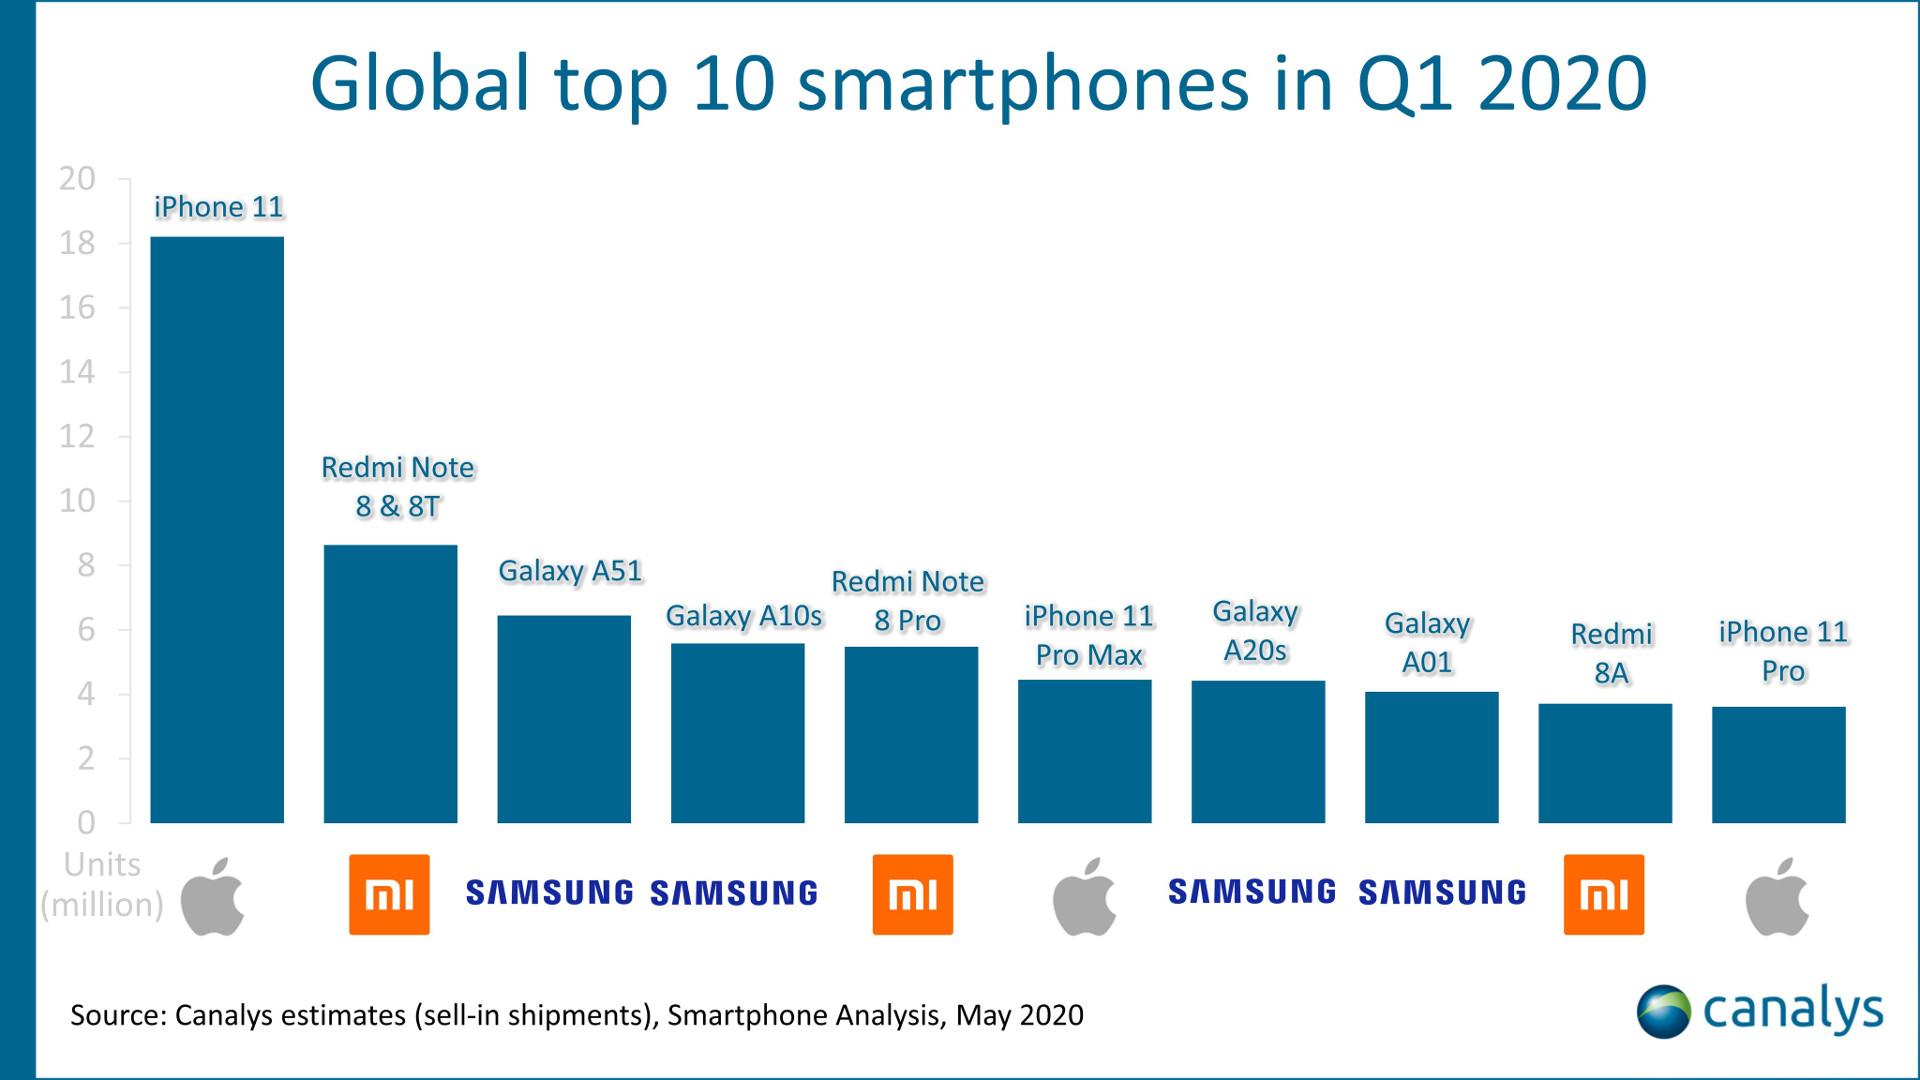 indstudering træ lemmer The most popular Android phone of Q1 2020 wasn't a Samsung device